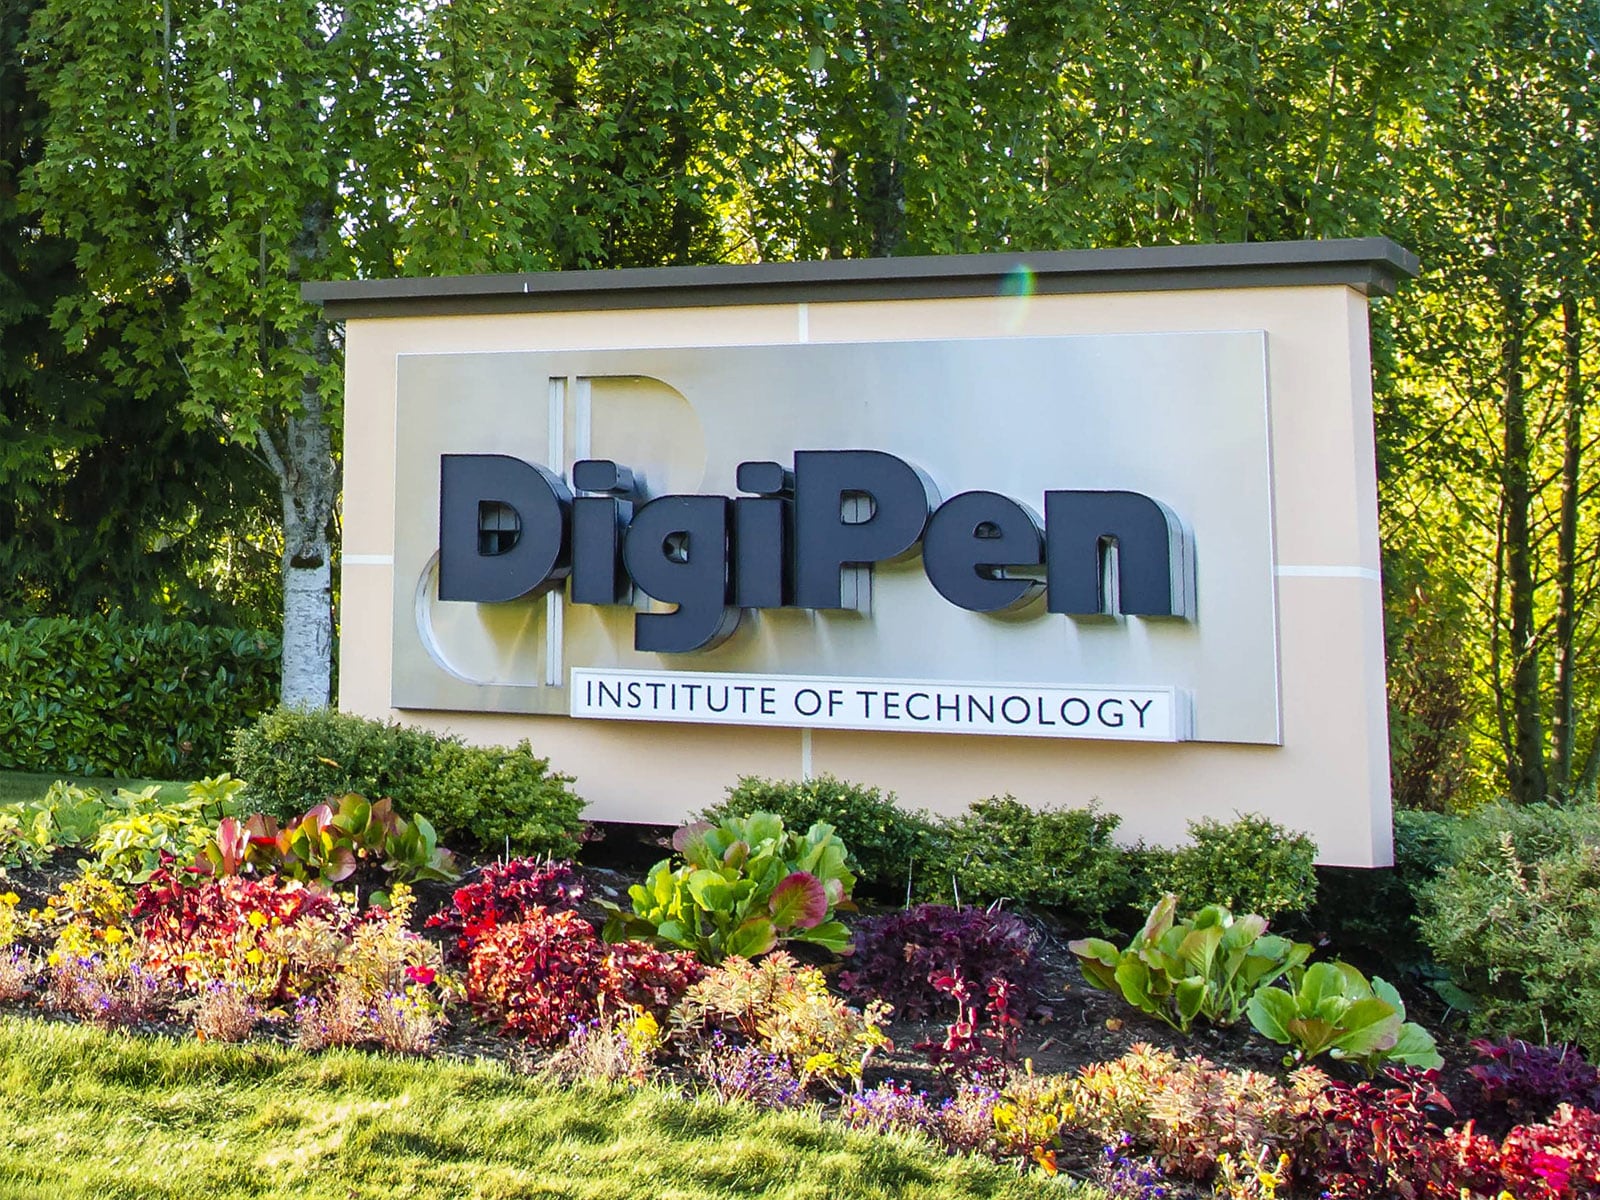 Photograph of the DigiPen sign taken on a summer evening